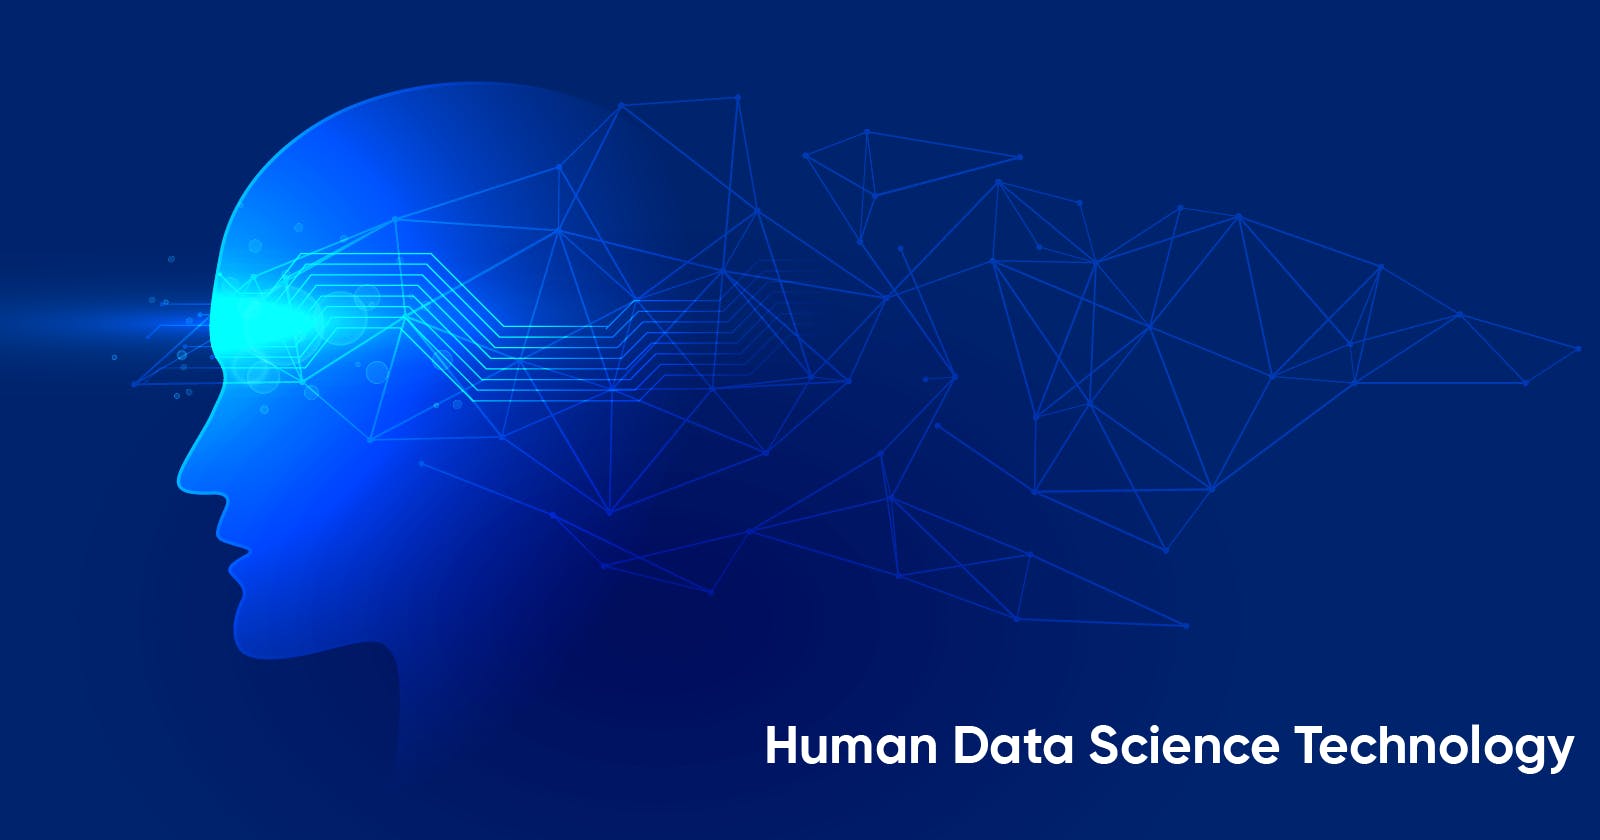 Human Data Science technology would be most revolutionary for solving Health-related social problems.